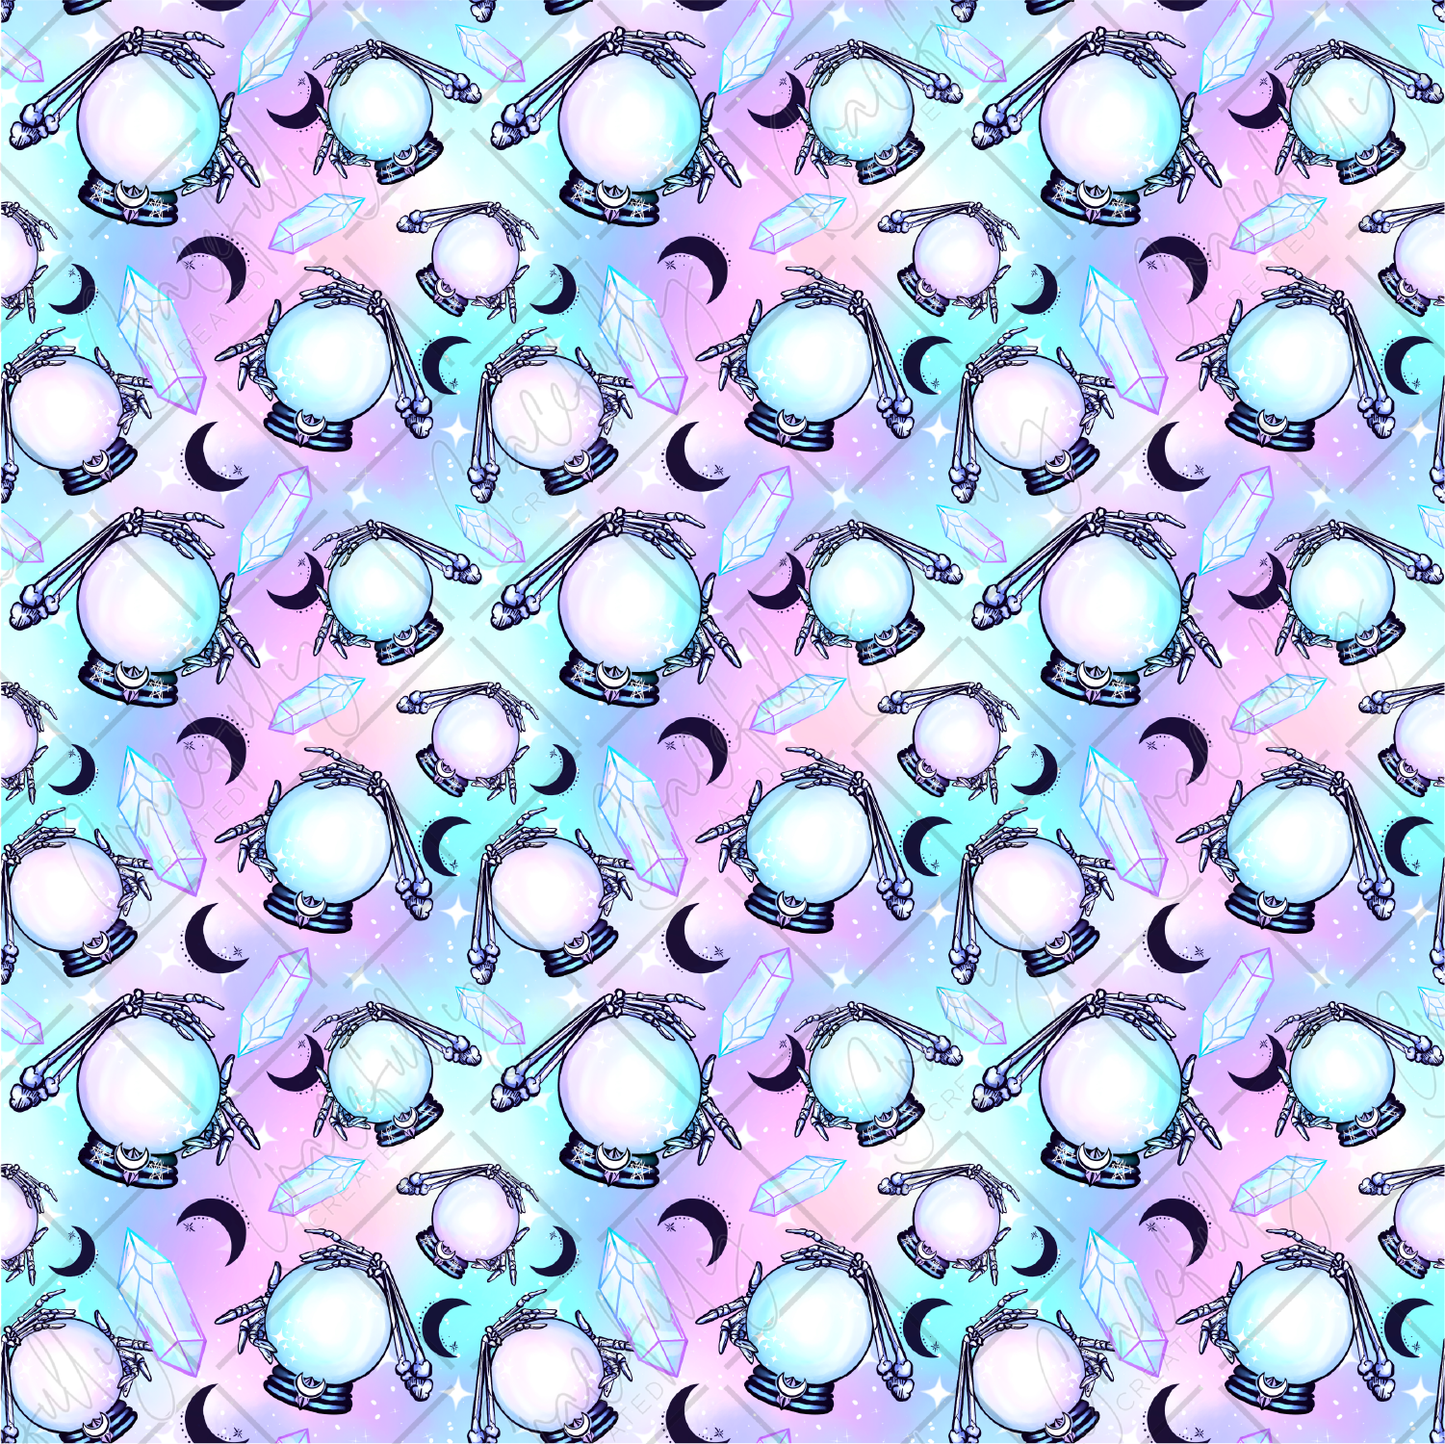 HPV13 Crystal Ball Pastels